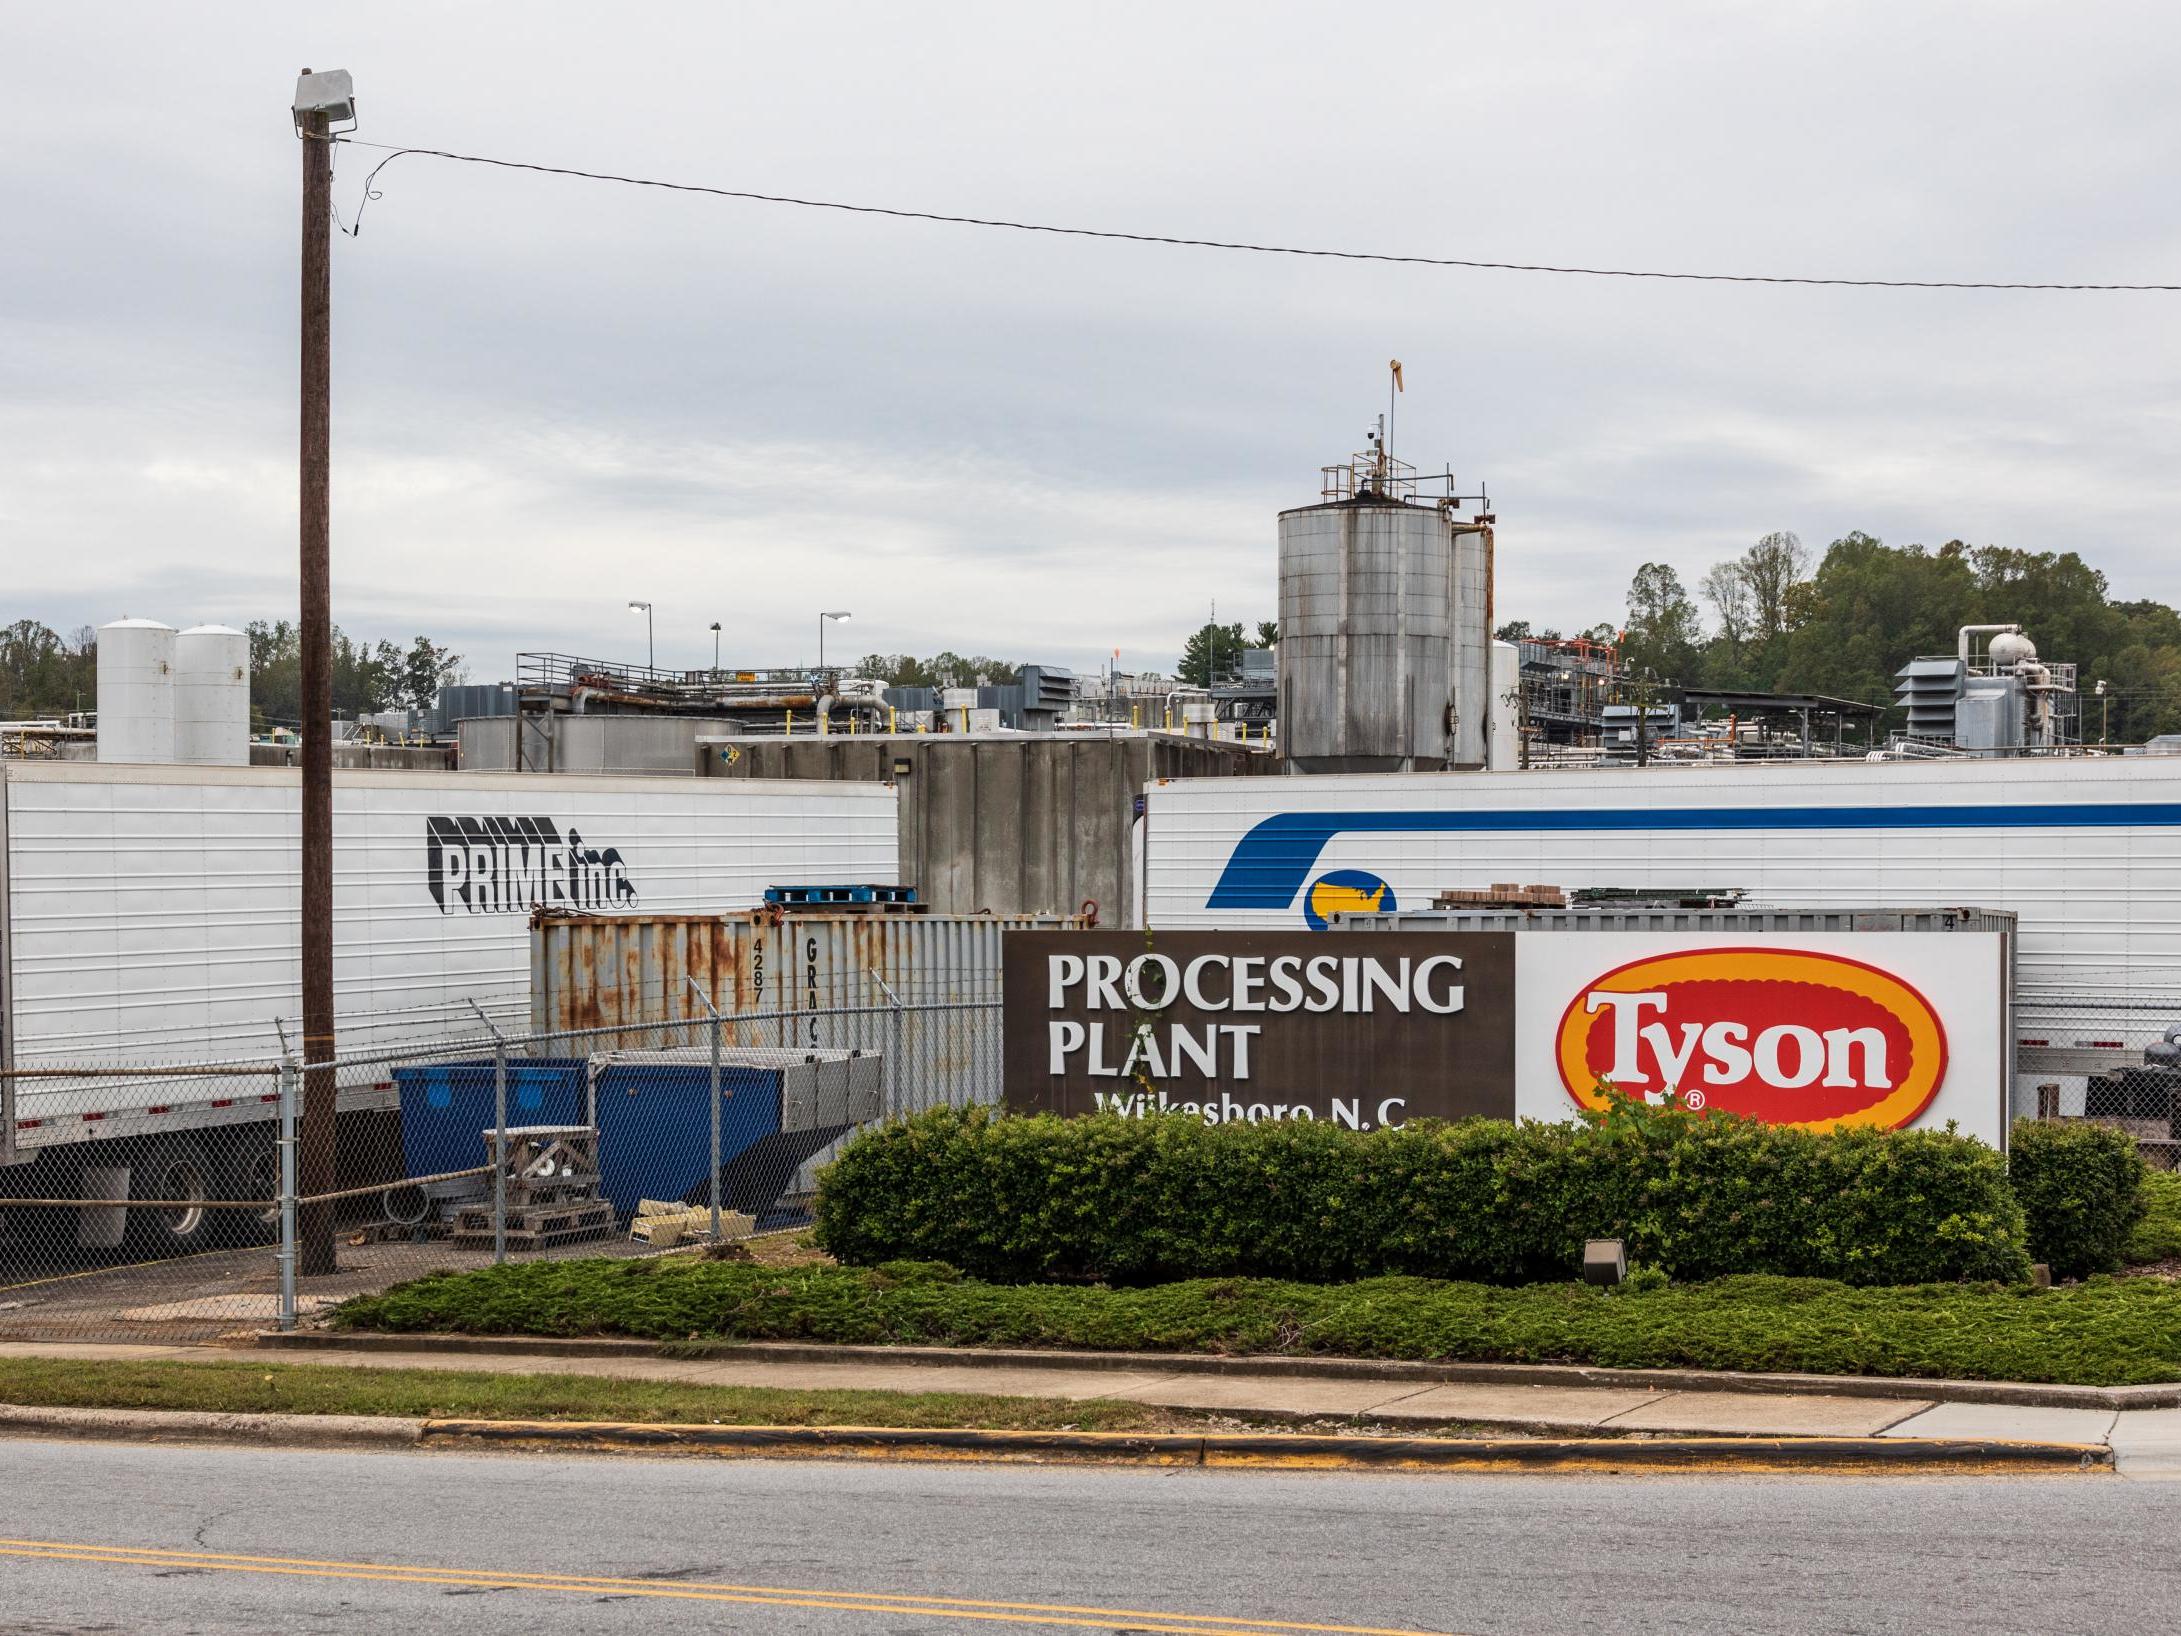 A processing plant belonging to Tyson Foods